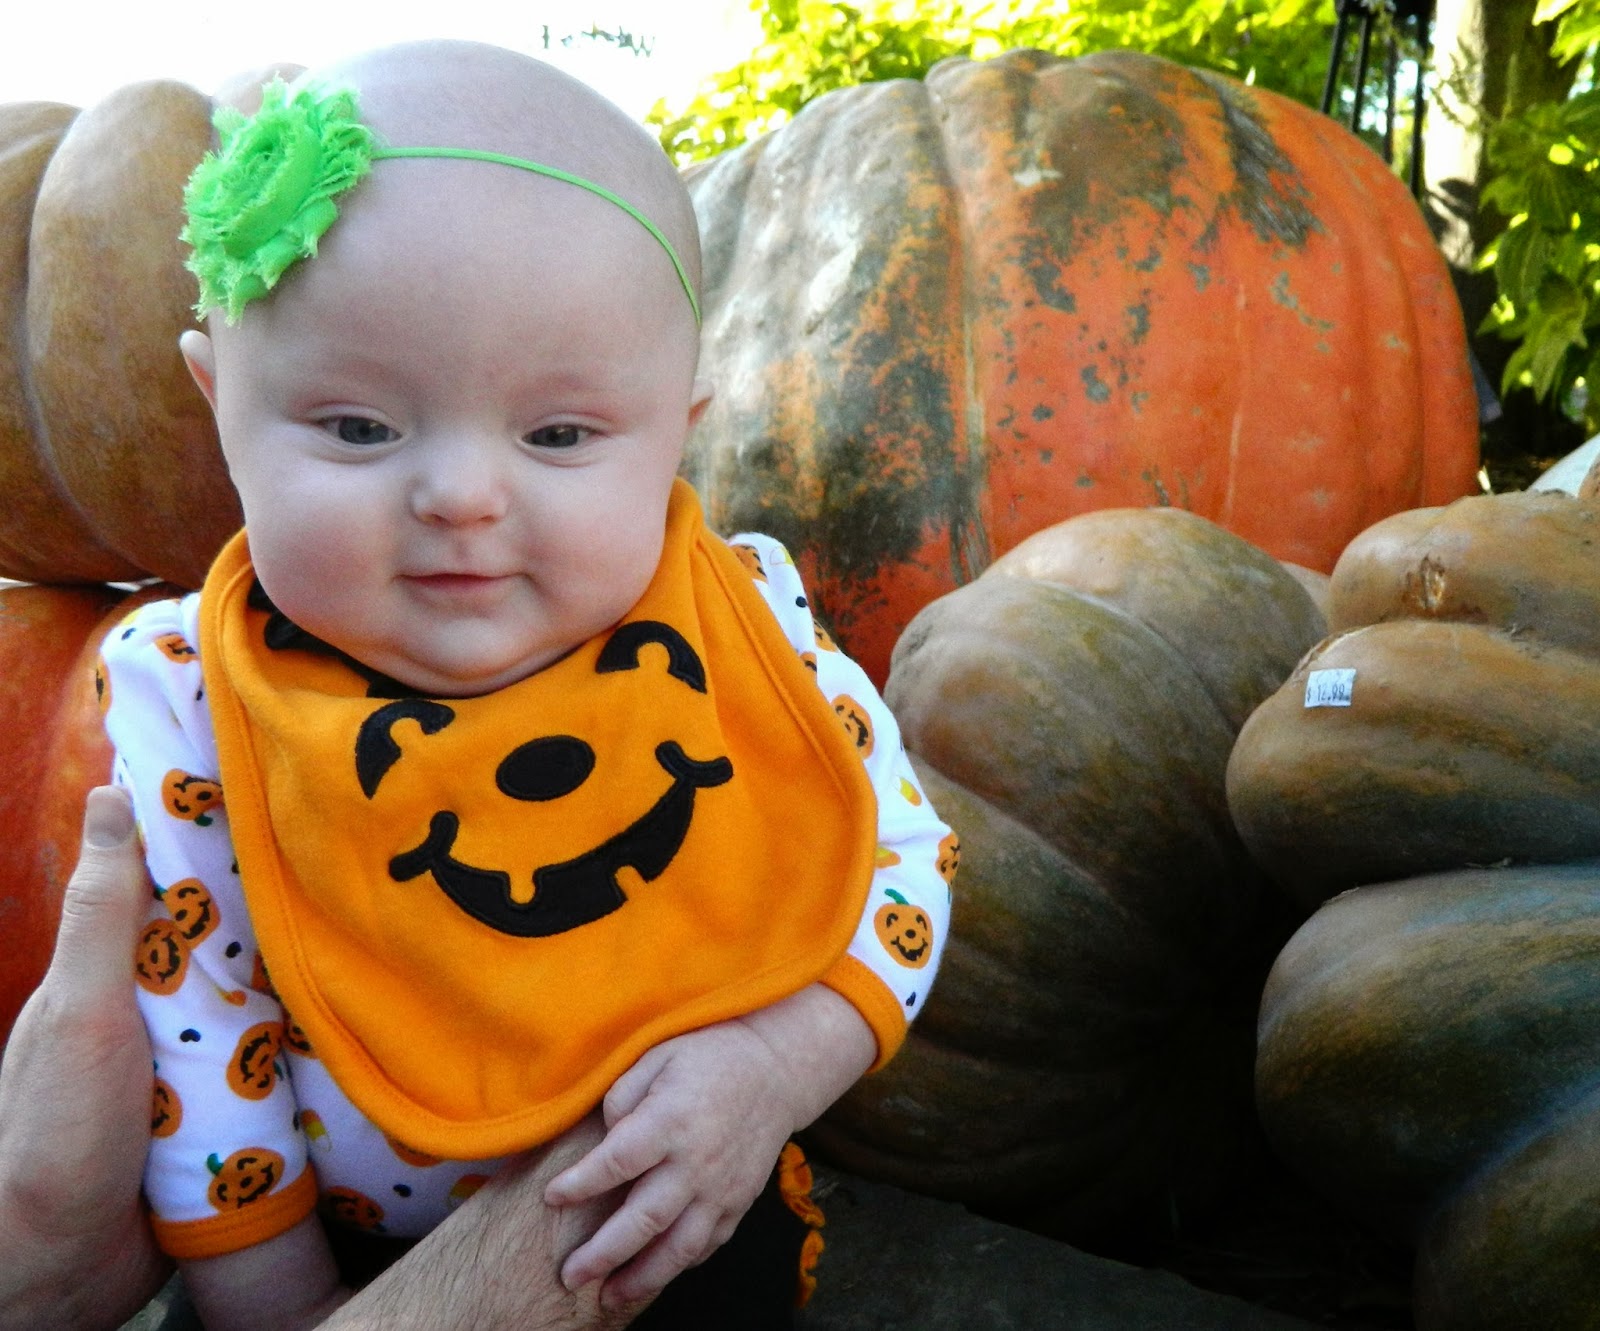 Polka-Dotty Place: Taking Our Lil' Pumpkin to the Pumpkin Patch